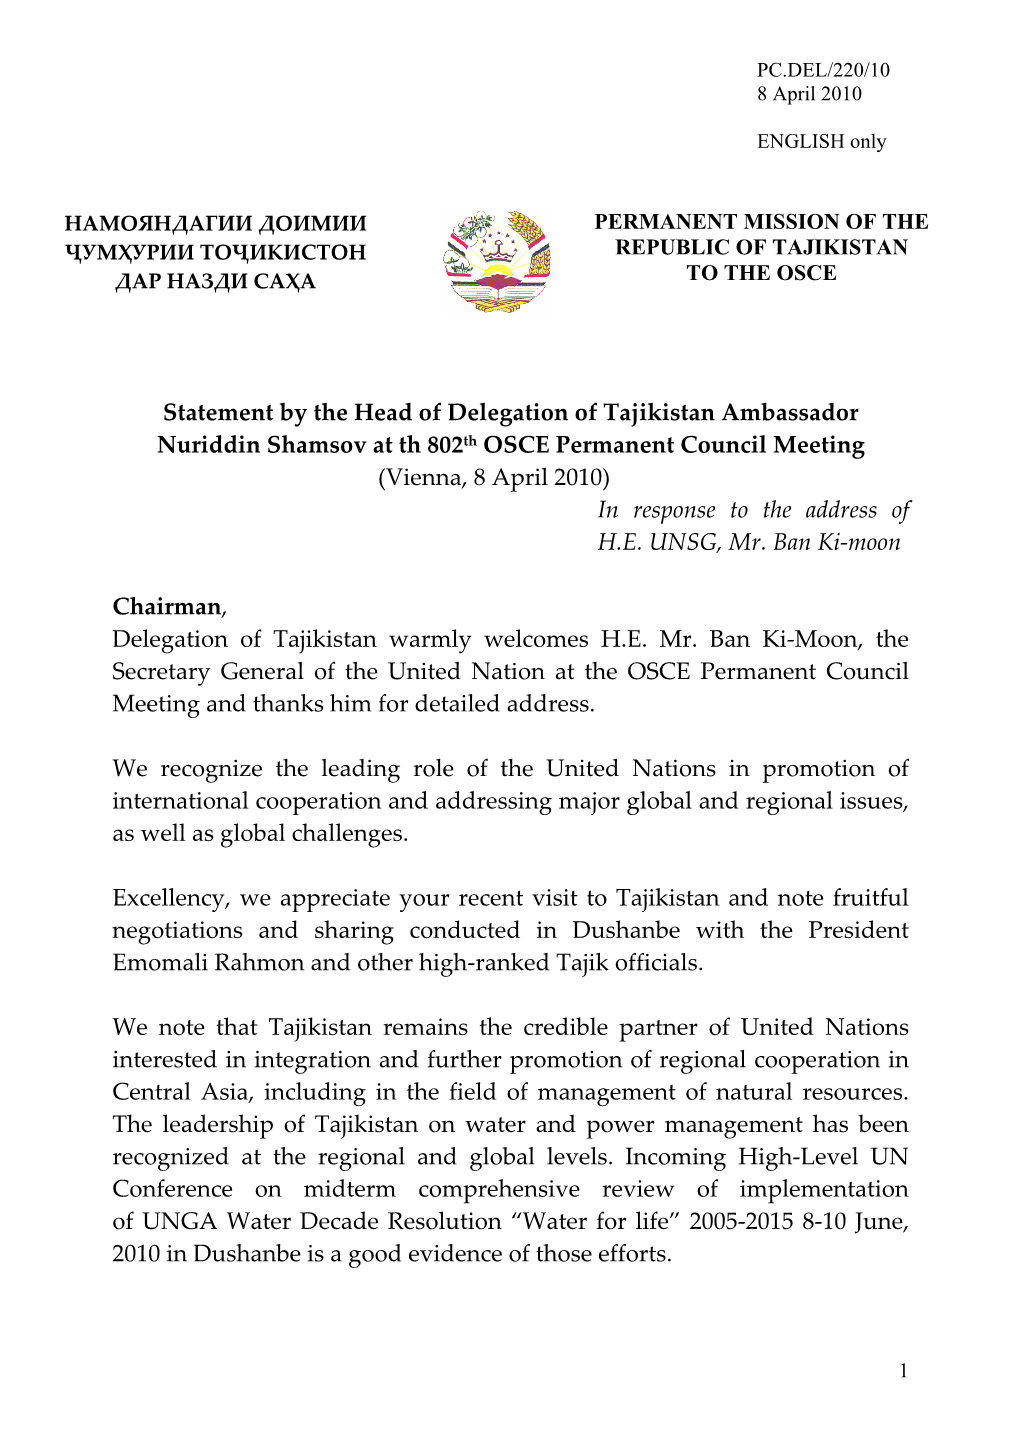 Statement by the Head of Delegation of Tajikistan Ambassador Nuriddin Shamsov at Th 802Th OSCE Permanent Council Meeting (Vienna